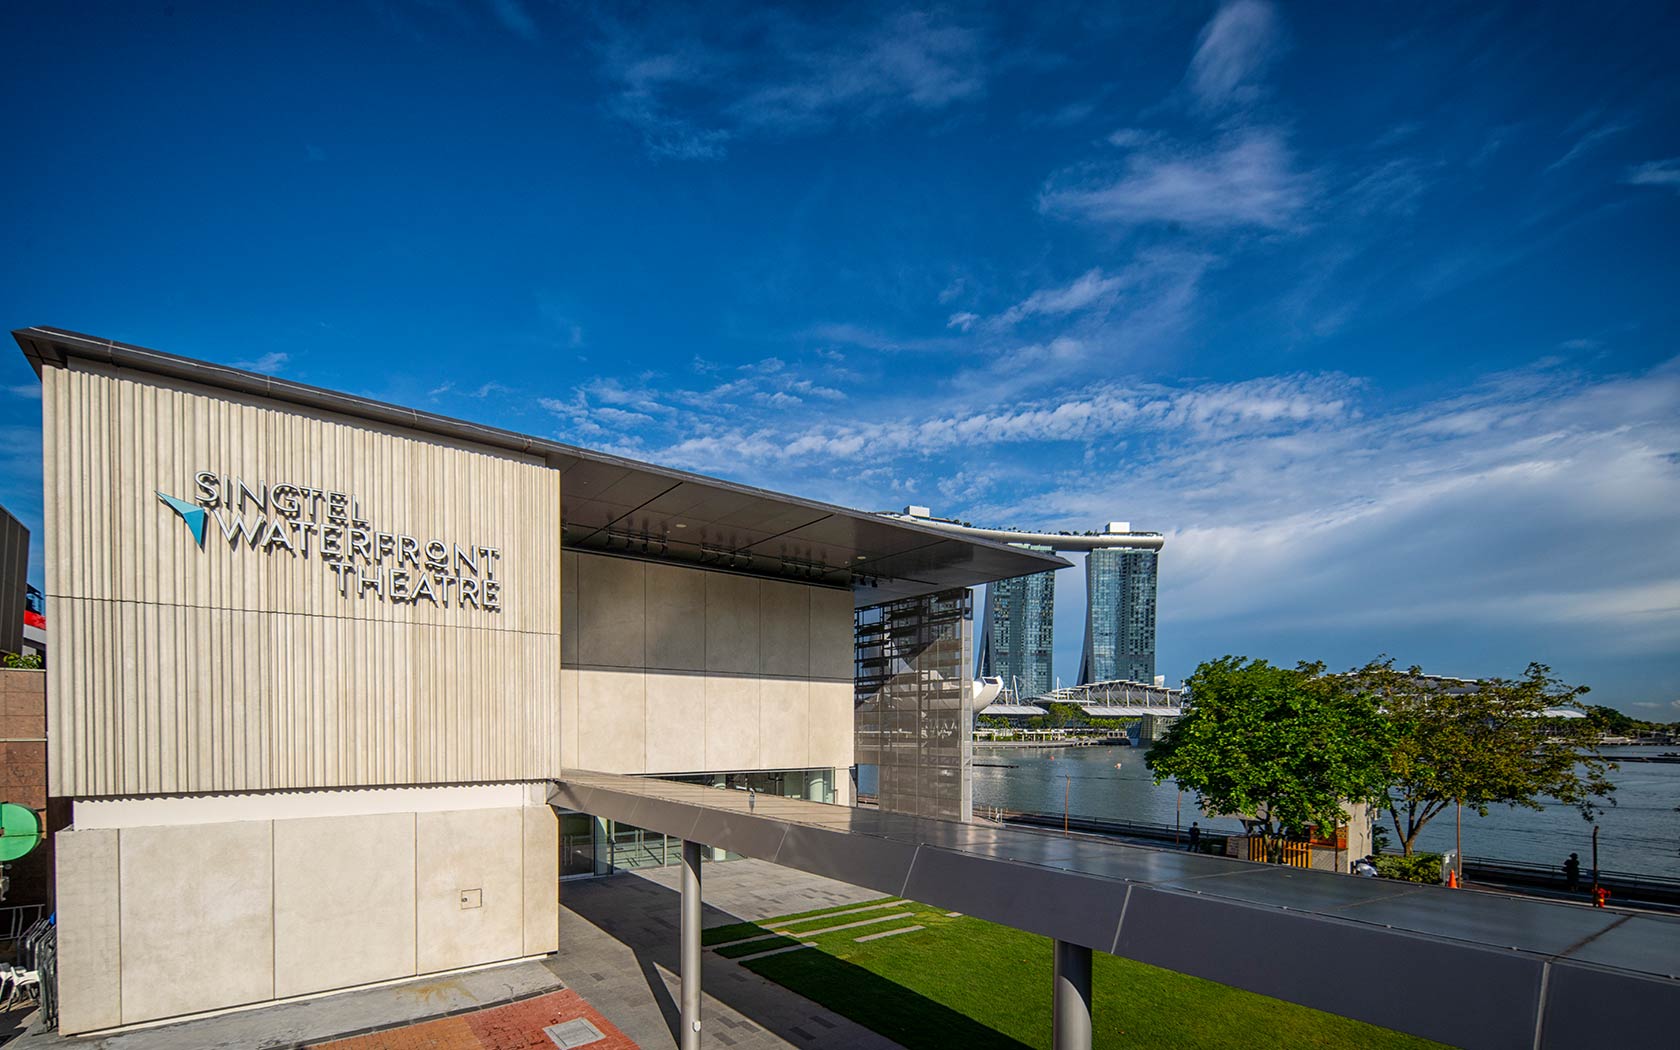 Image of the Singtel Waterfront Theatre in the day taken against the Marina Bay waterfront.